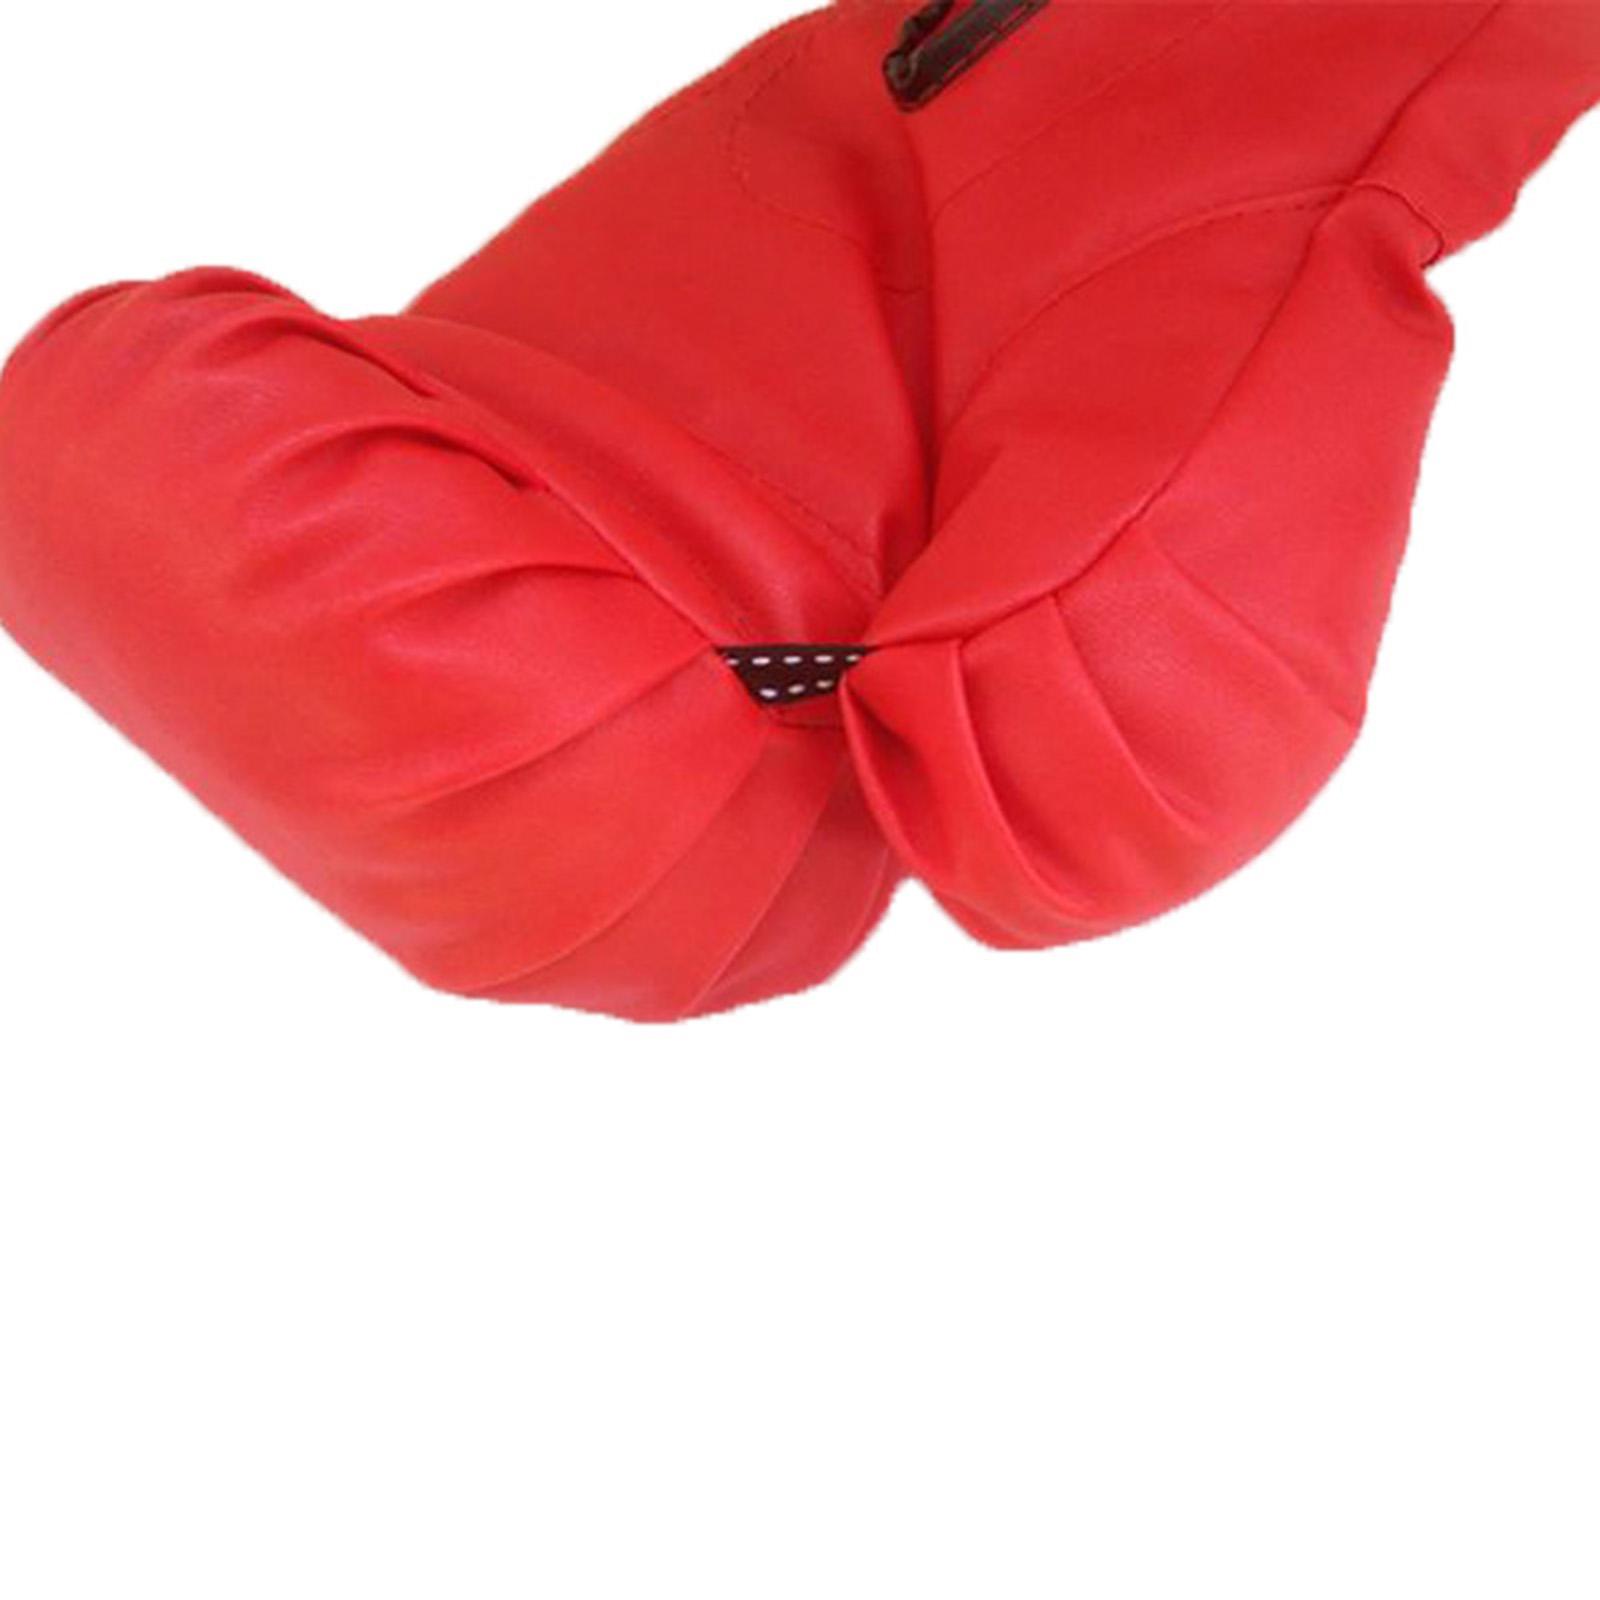 Mma Gloves Fitness Martial Arts Breathable Adult Children Kick Boxing Gloves Red Adult